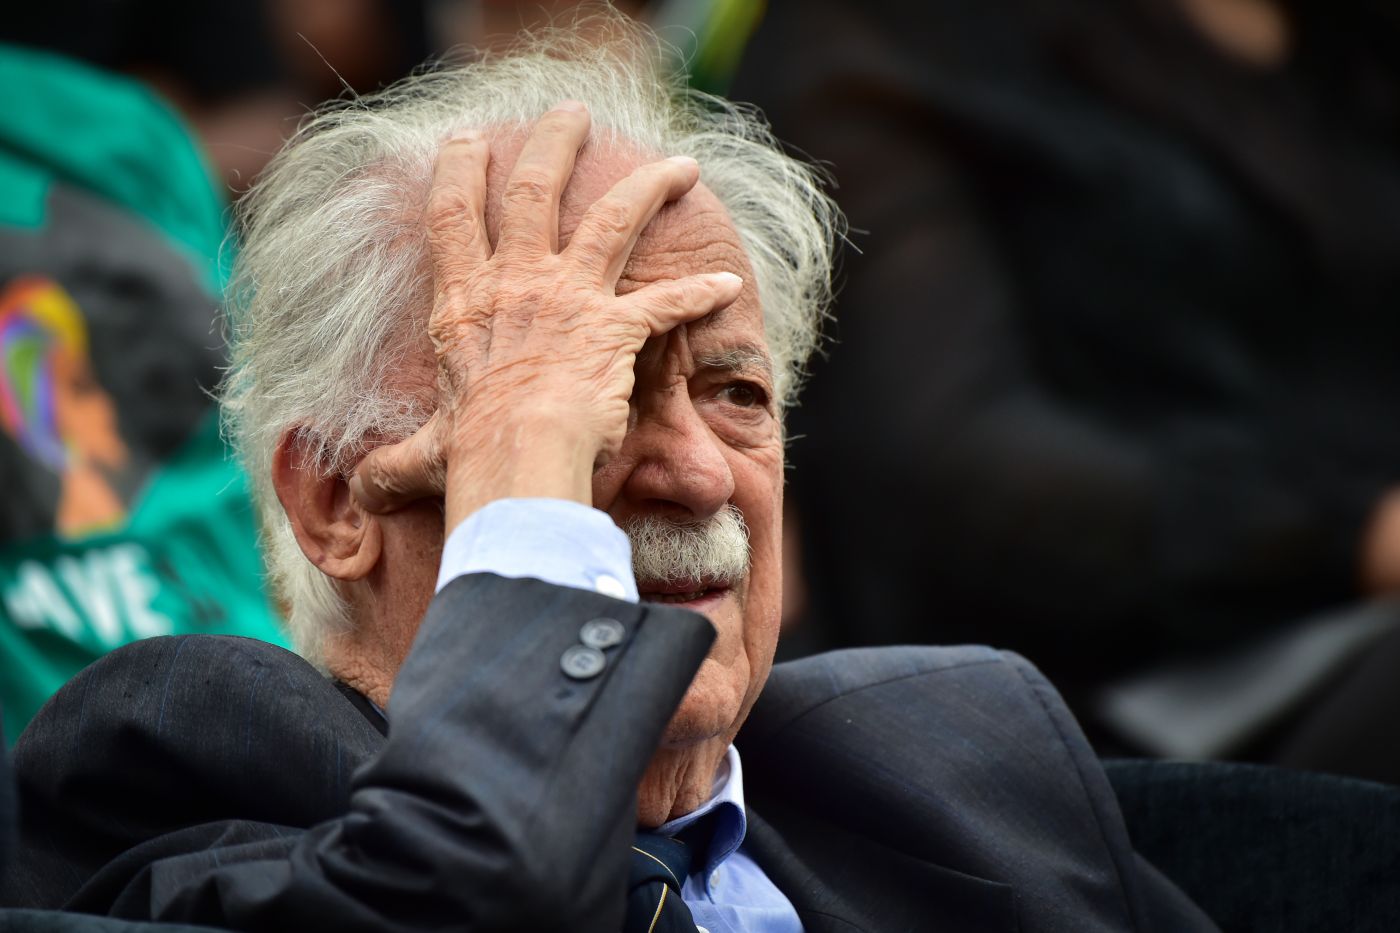 George Bizos clasps his forehead at a memorial service for Winnie Madikizela-Mandela